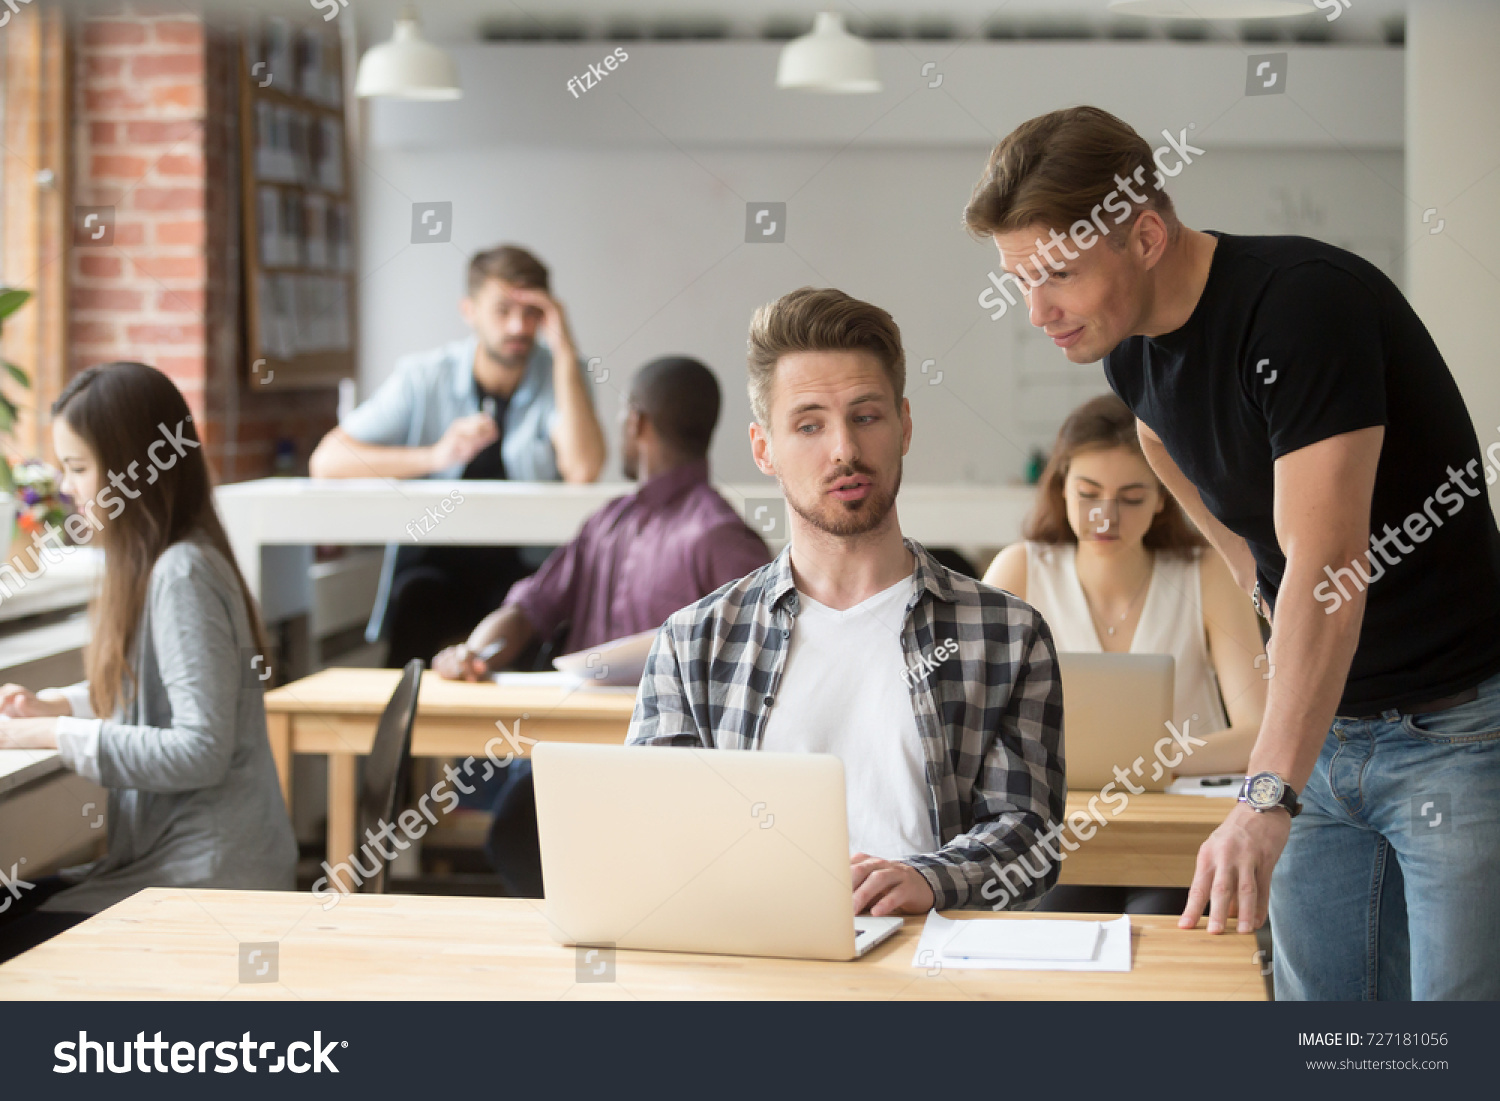 Casual entrepreneur explaining business project to his coworker. Two young employees discuss work-related goals in front of laptop at workplace in shared office. Team discussing marketing strategies.  #727181056